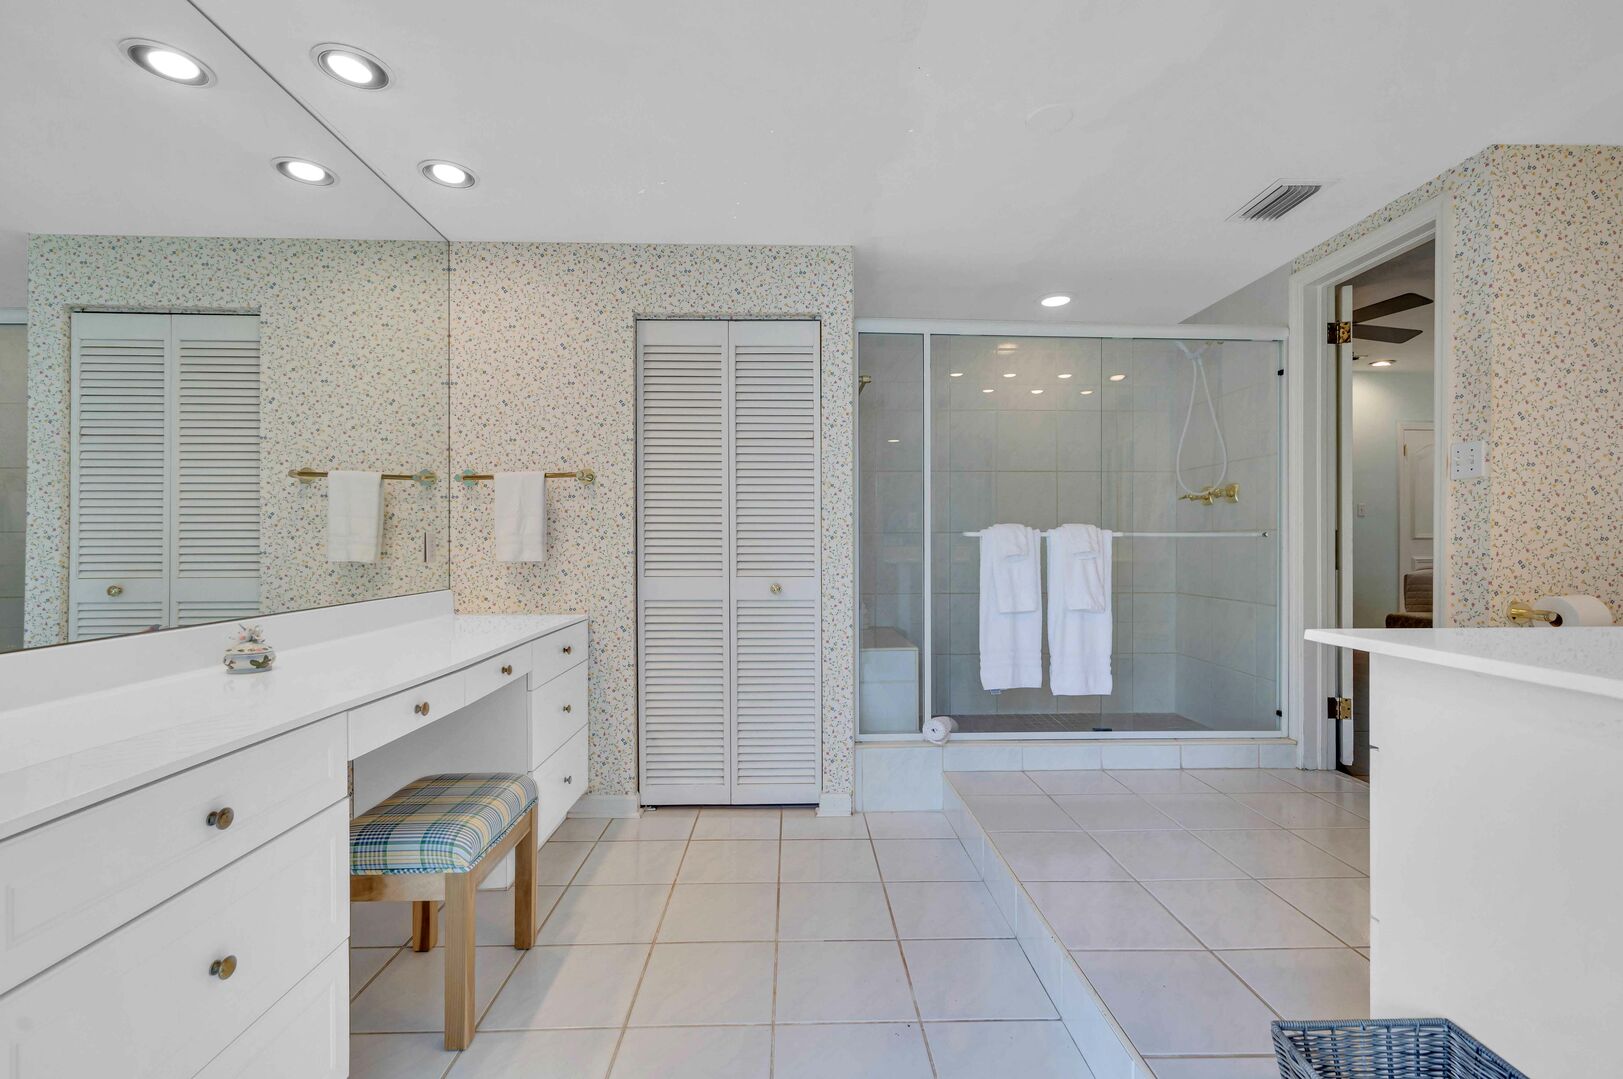 The oversized Master bathroom has a walk-in shower with separate makeup vanity area.